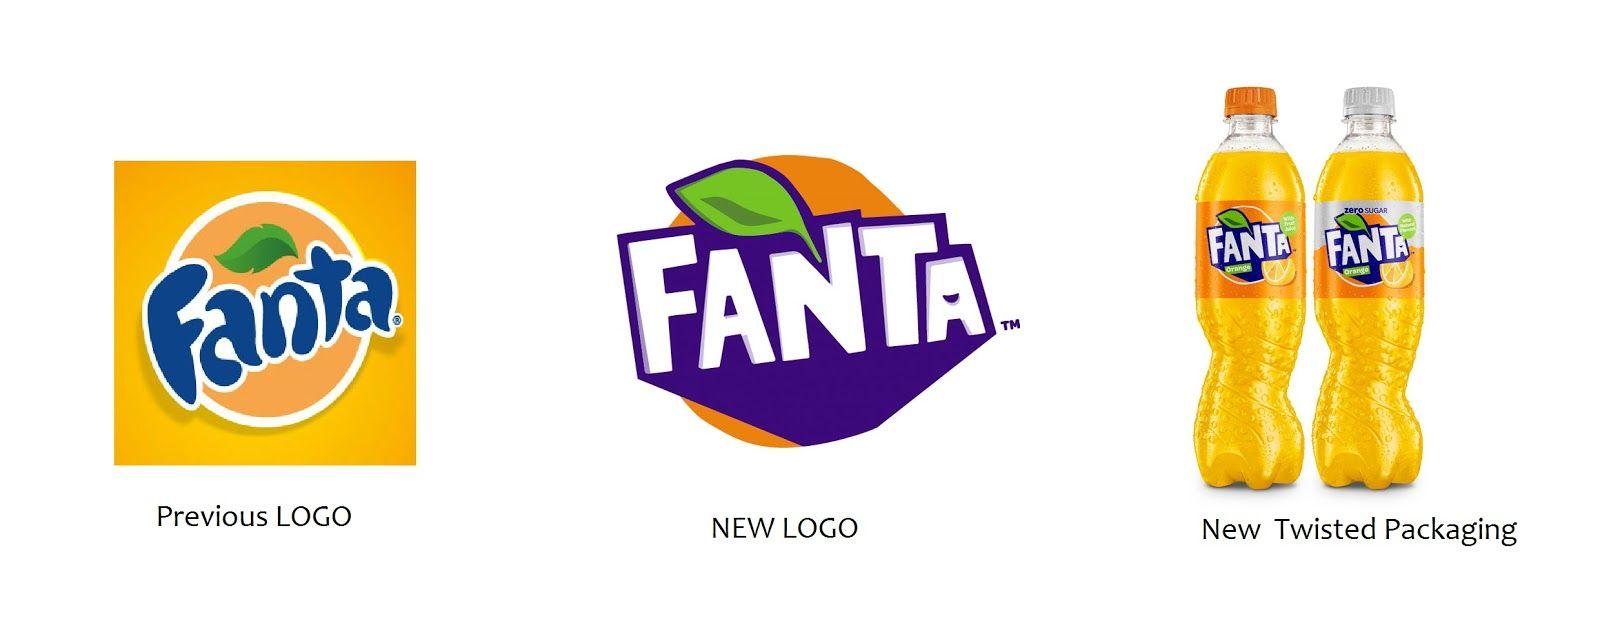 Old Fanta Logo - Fanta gets a New Logo and Twisted Packaging | Brand Update